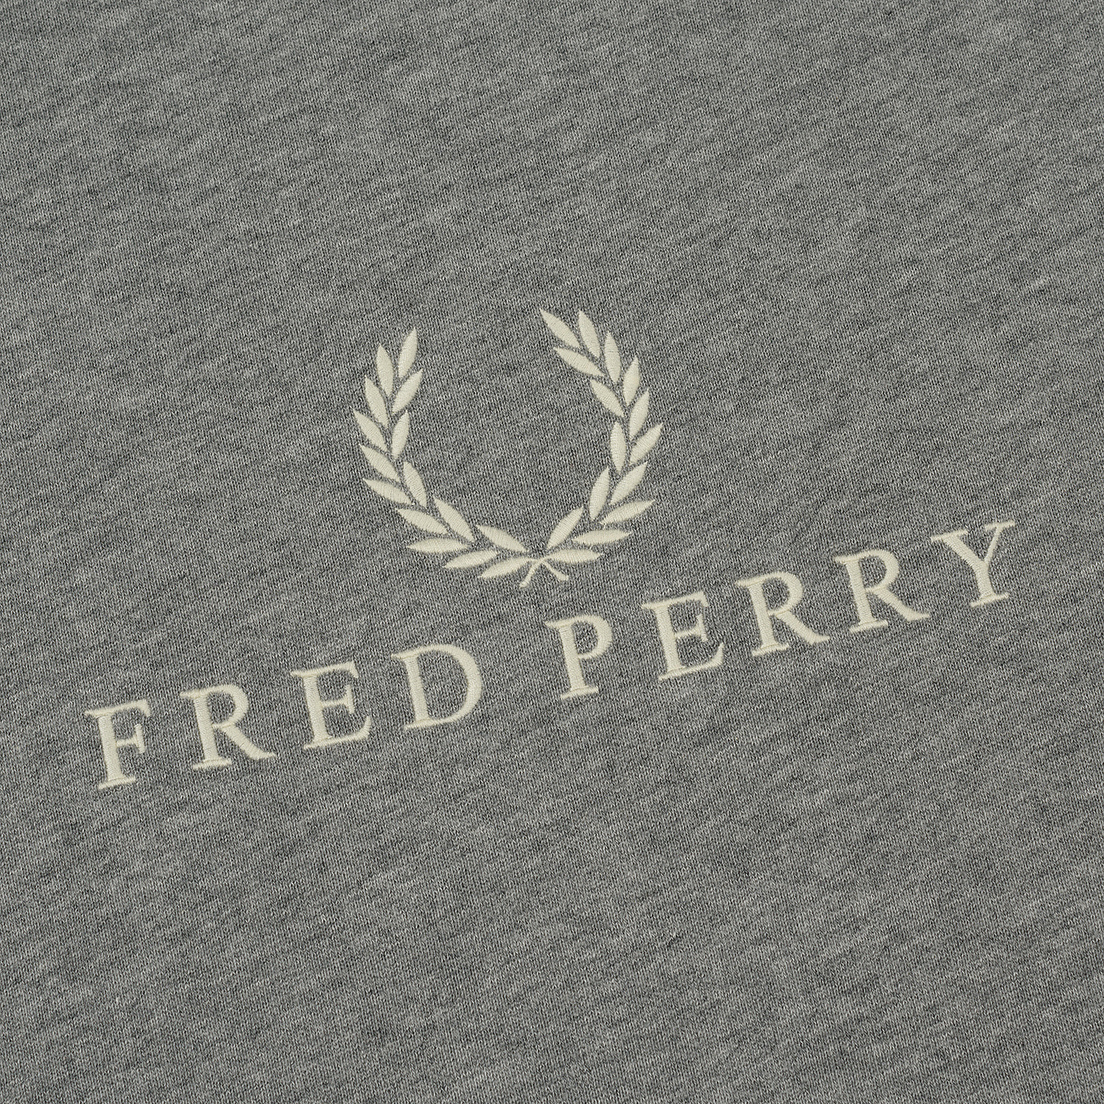 Fred Perry Женская толстовка Sports Authentic Crew Neck Embroidered